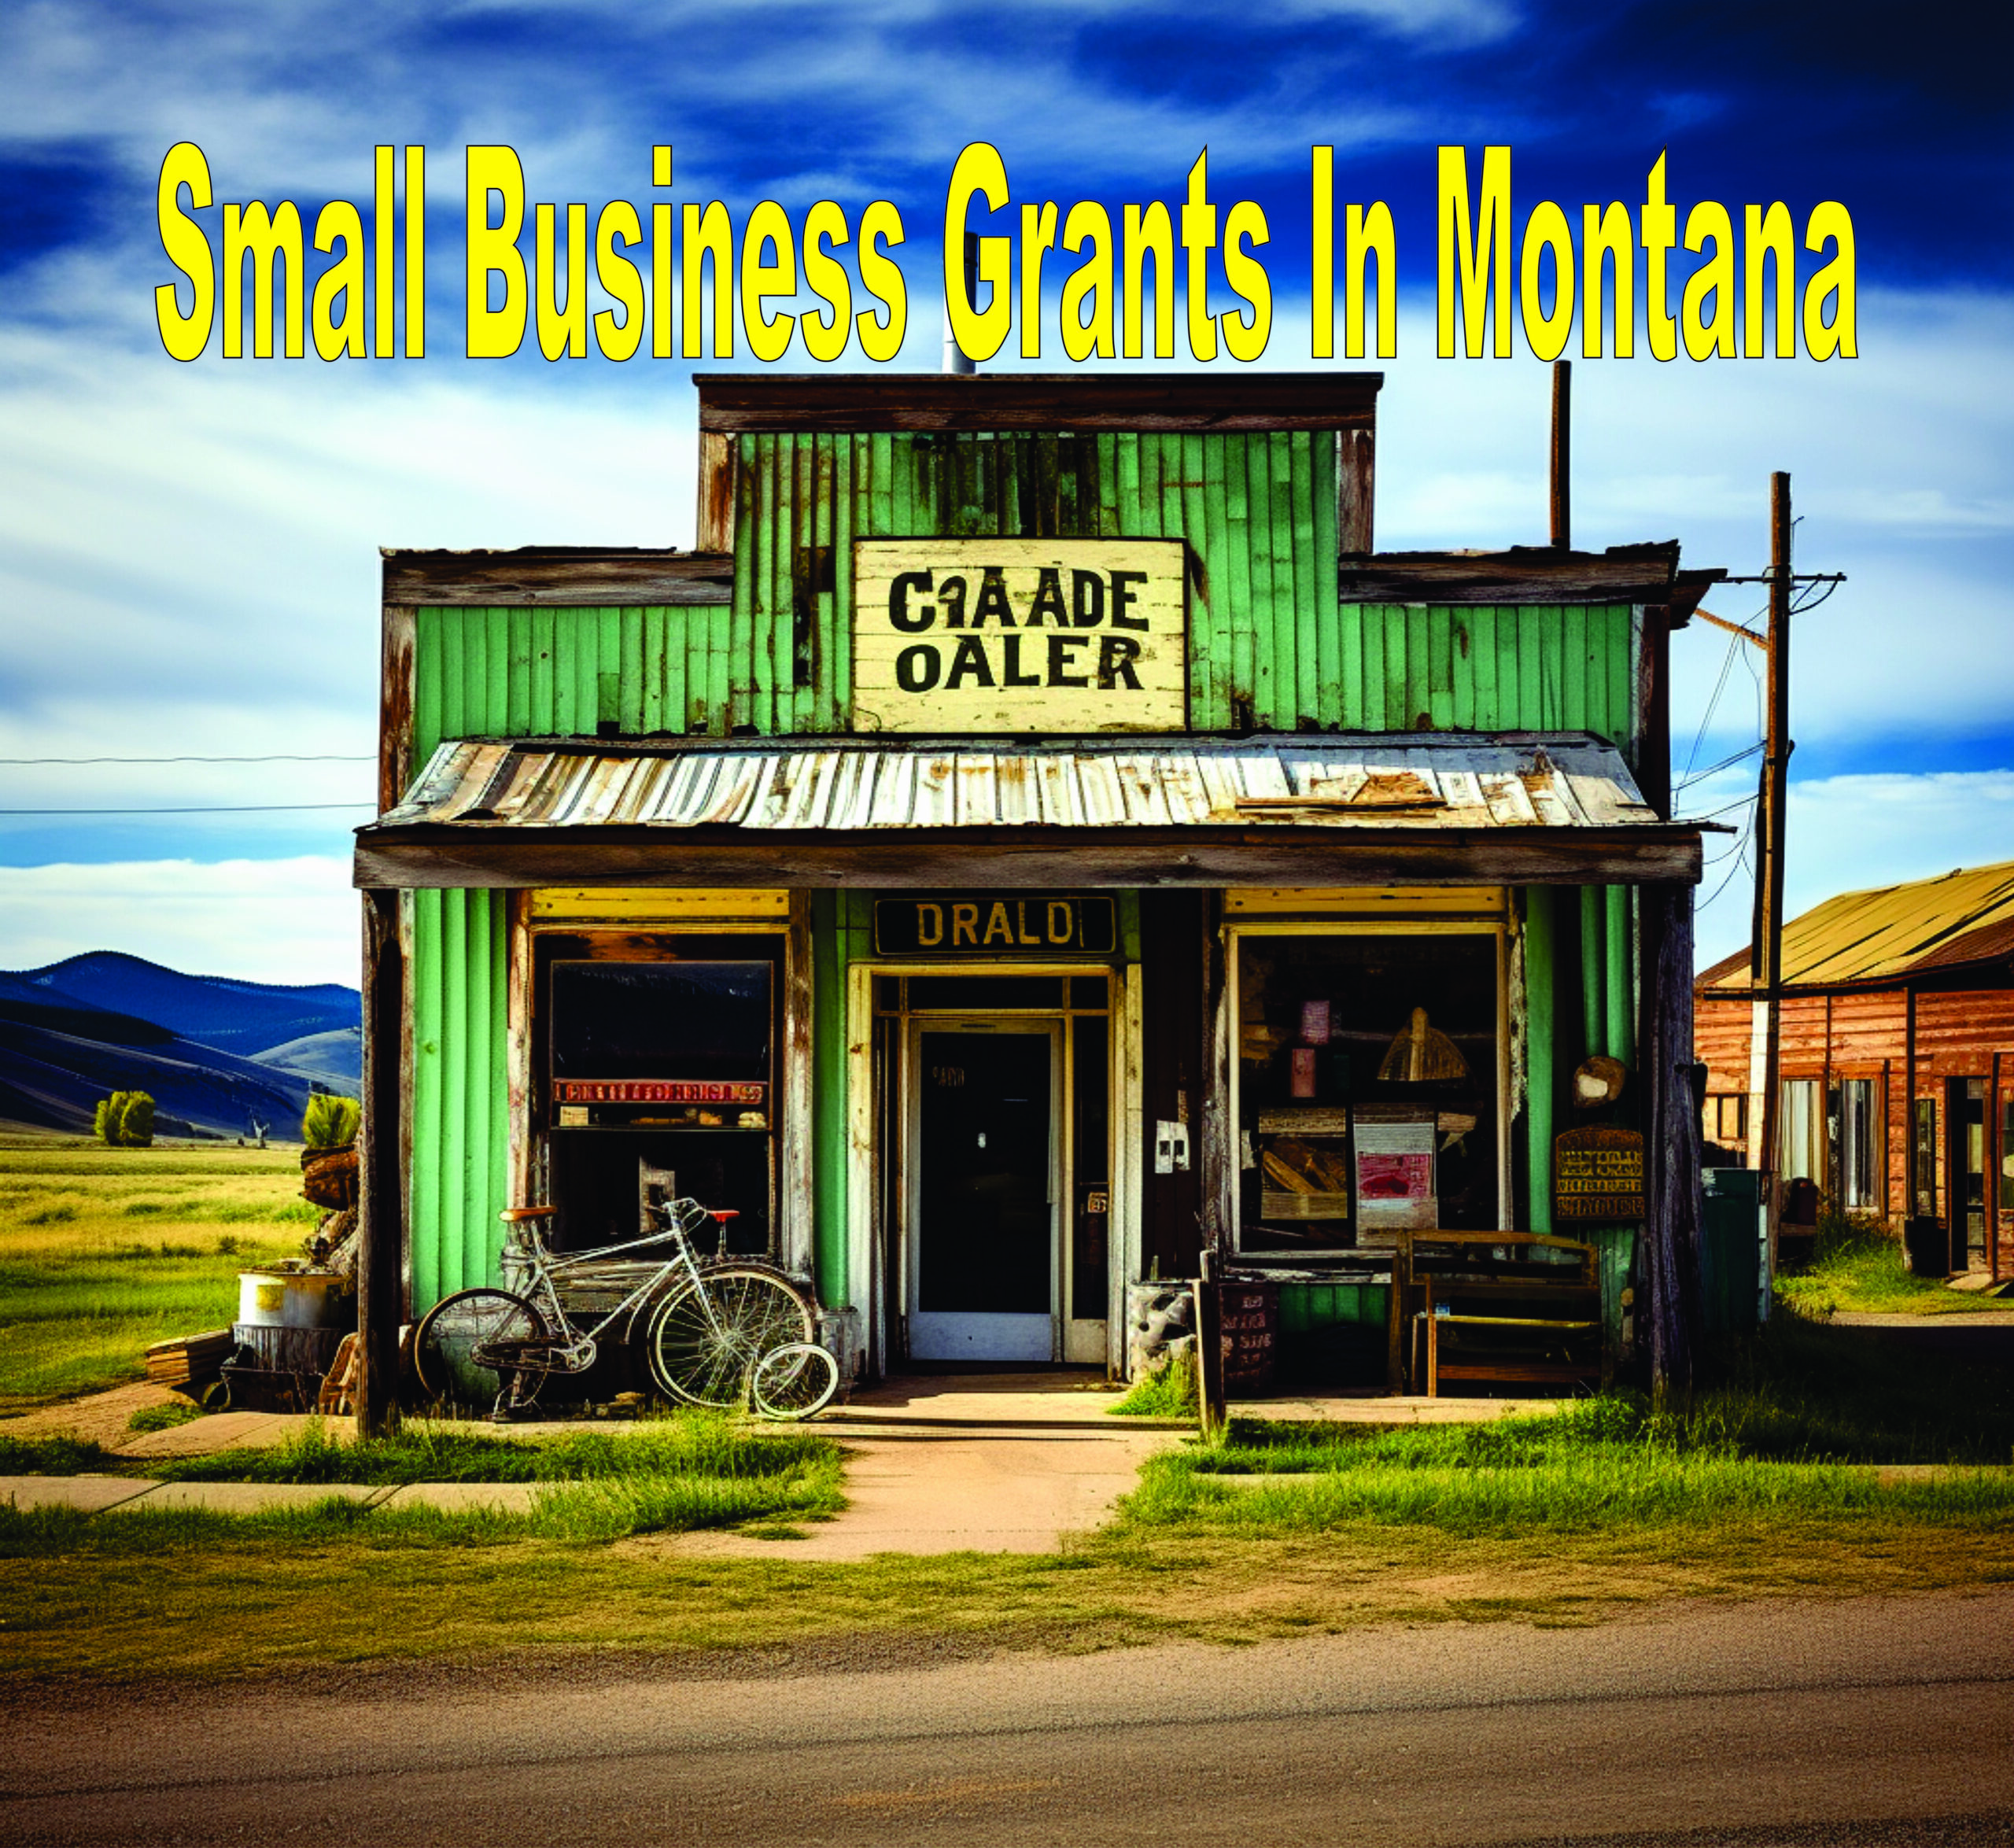 Small Business Grants In Montana